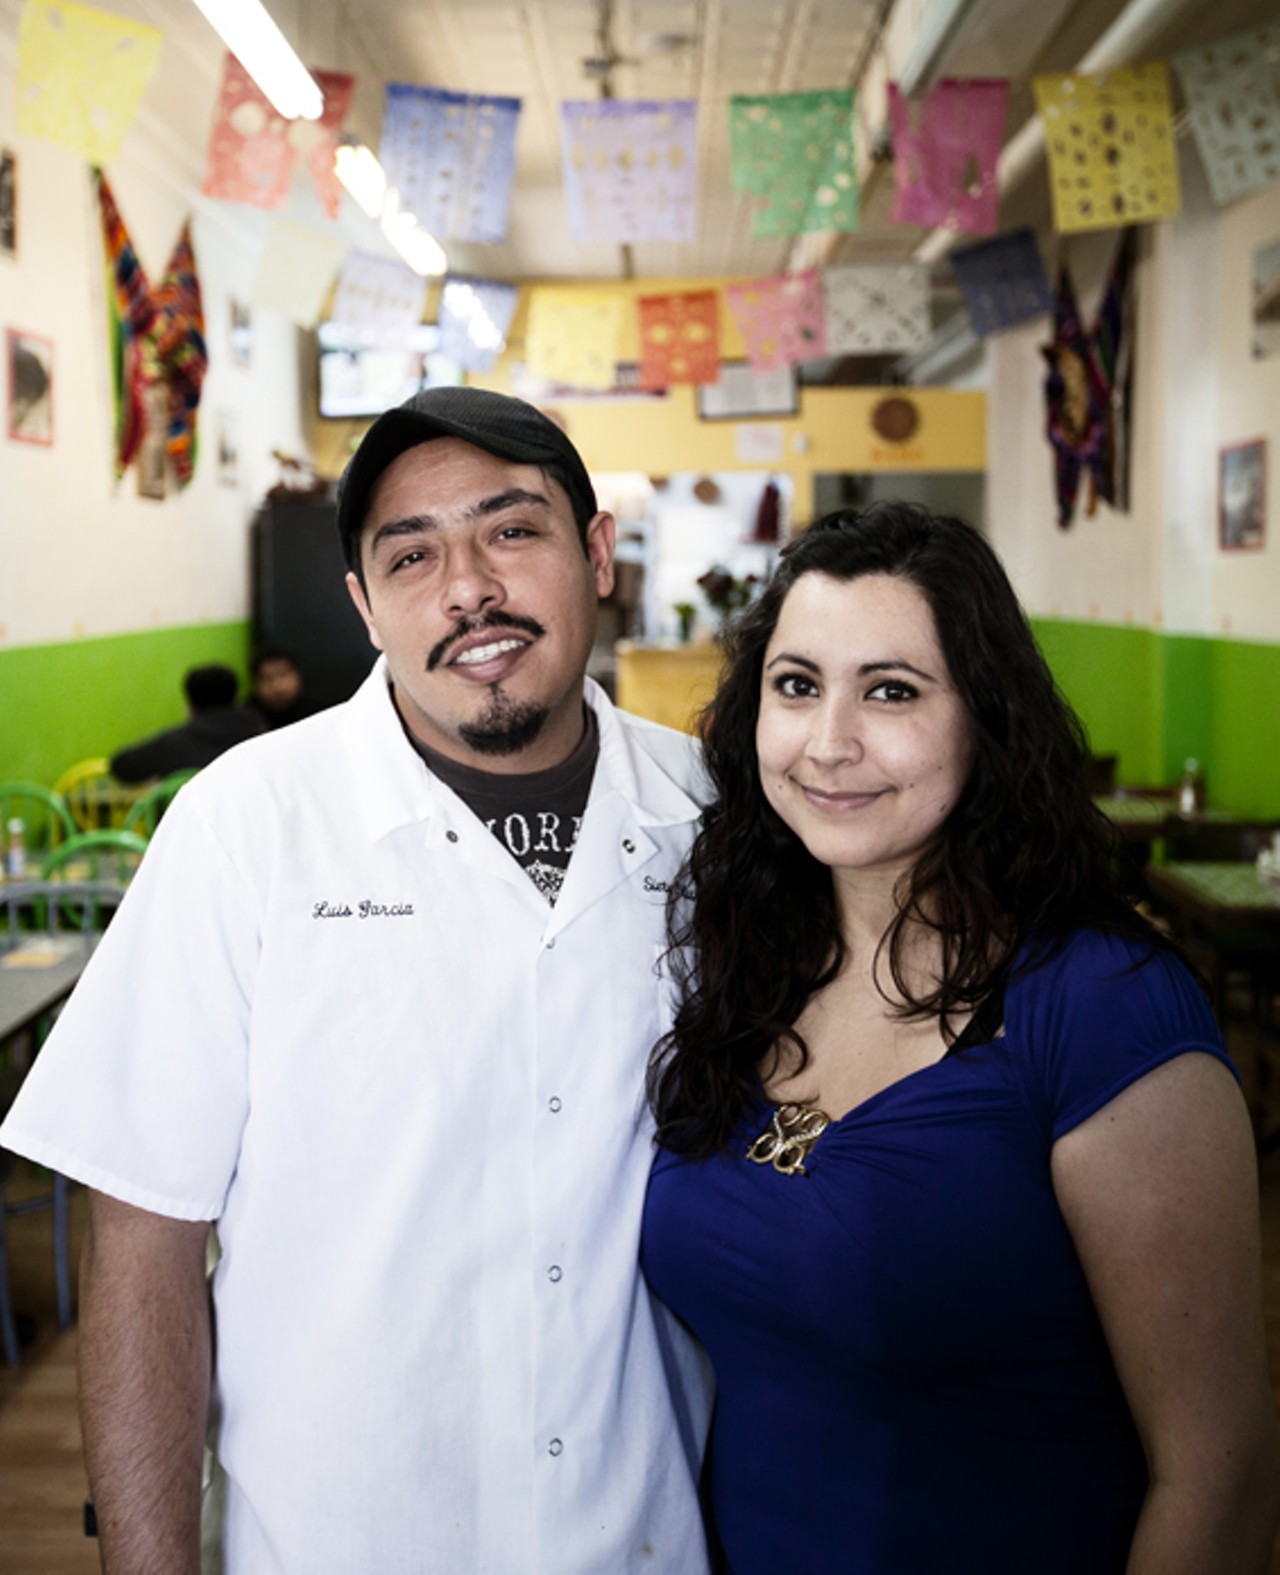 Executive chef and owner, Luis Garcia opened the restaurant with his brother and partnered a couple of months ago. Luis' wife, Chrystal Garcia, is the restaurant's general manager.